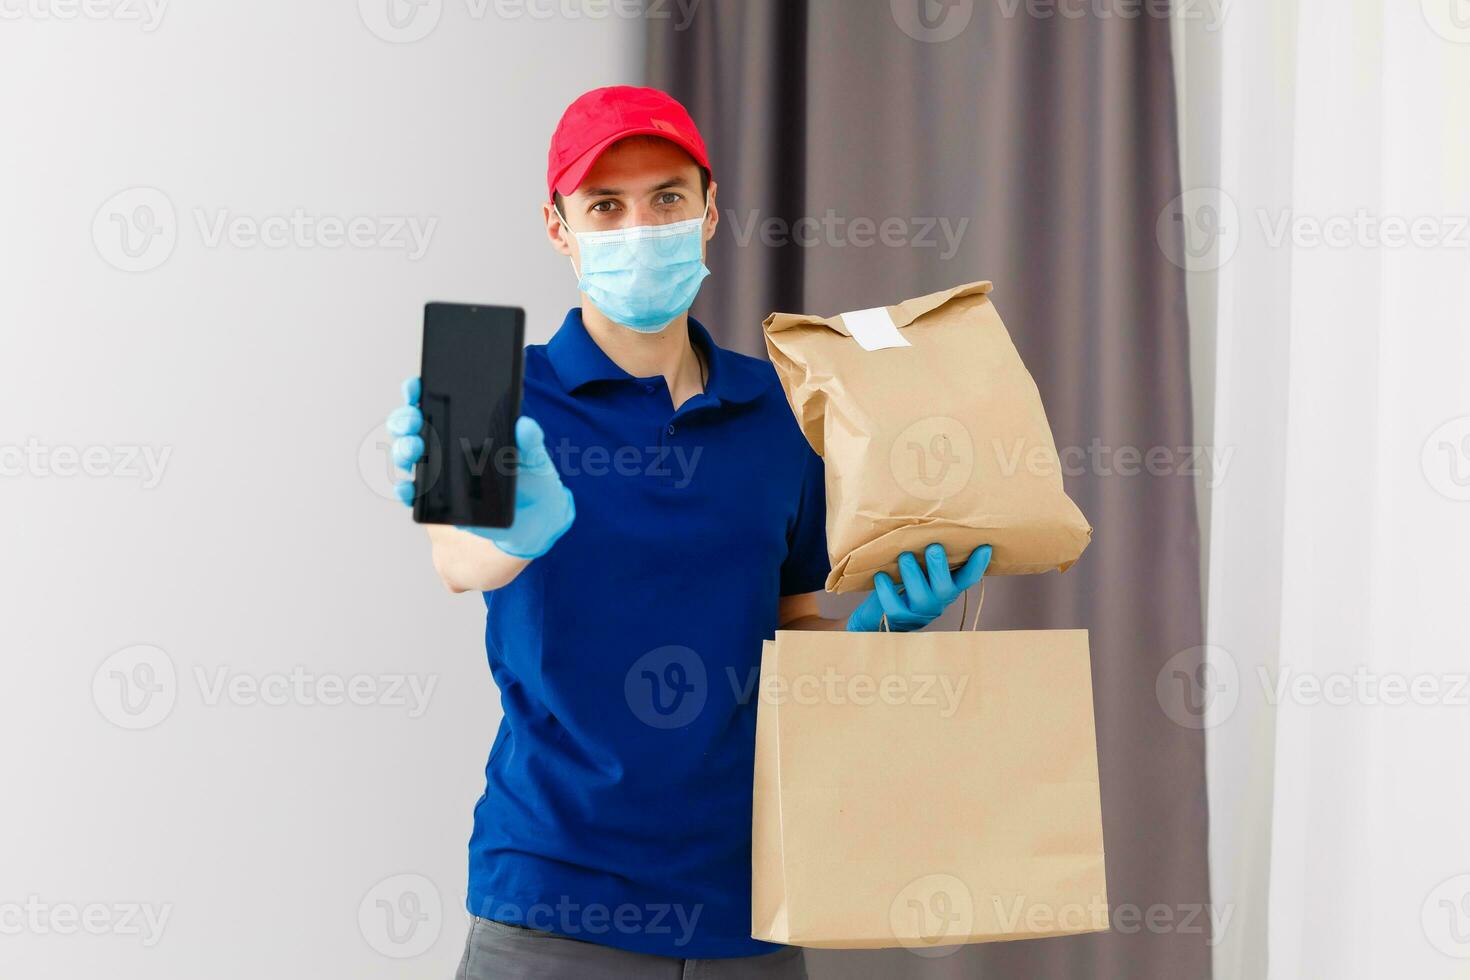 food delivery man in protective mask photo